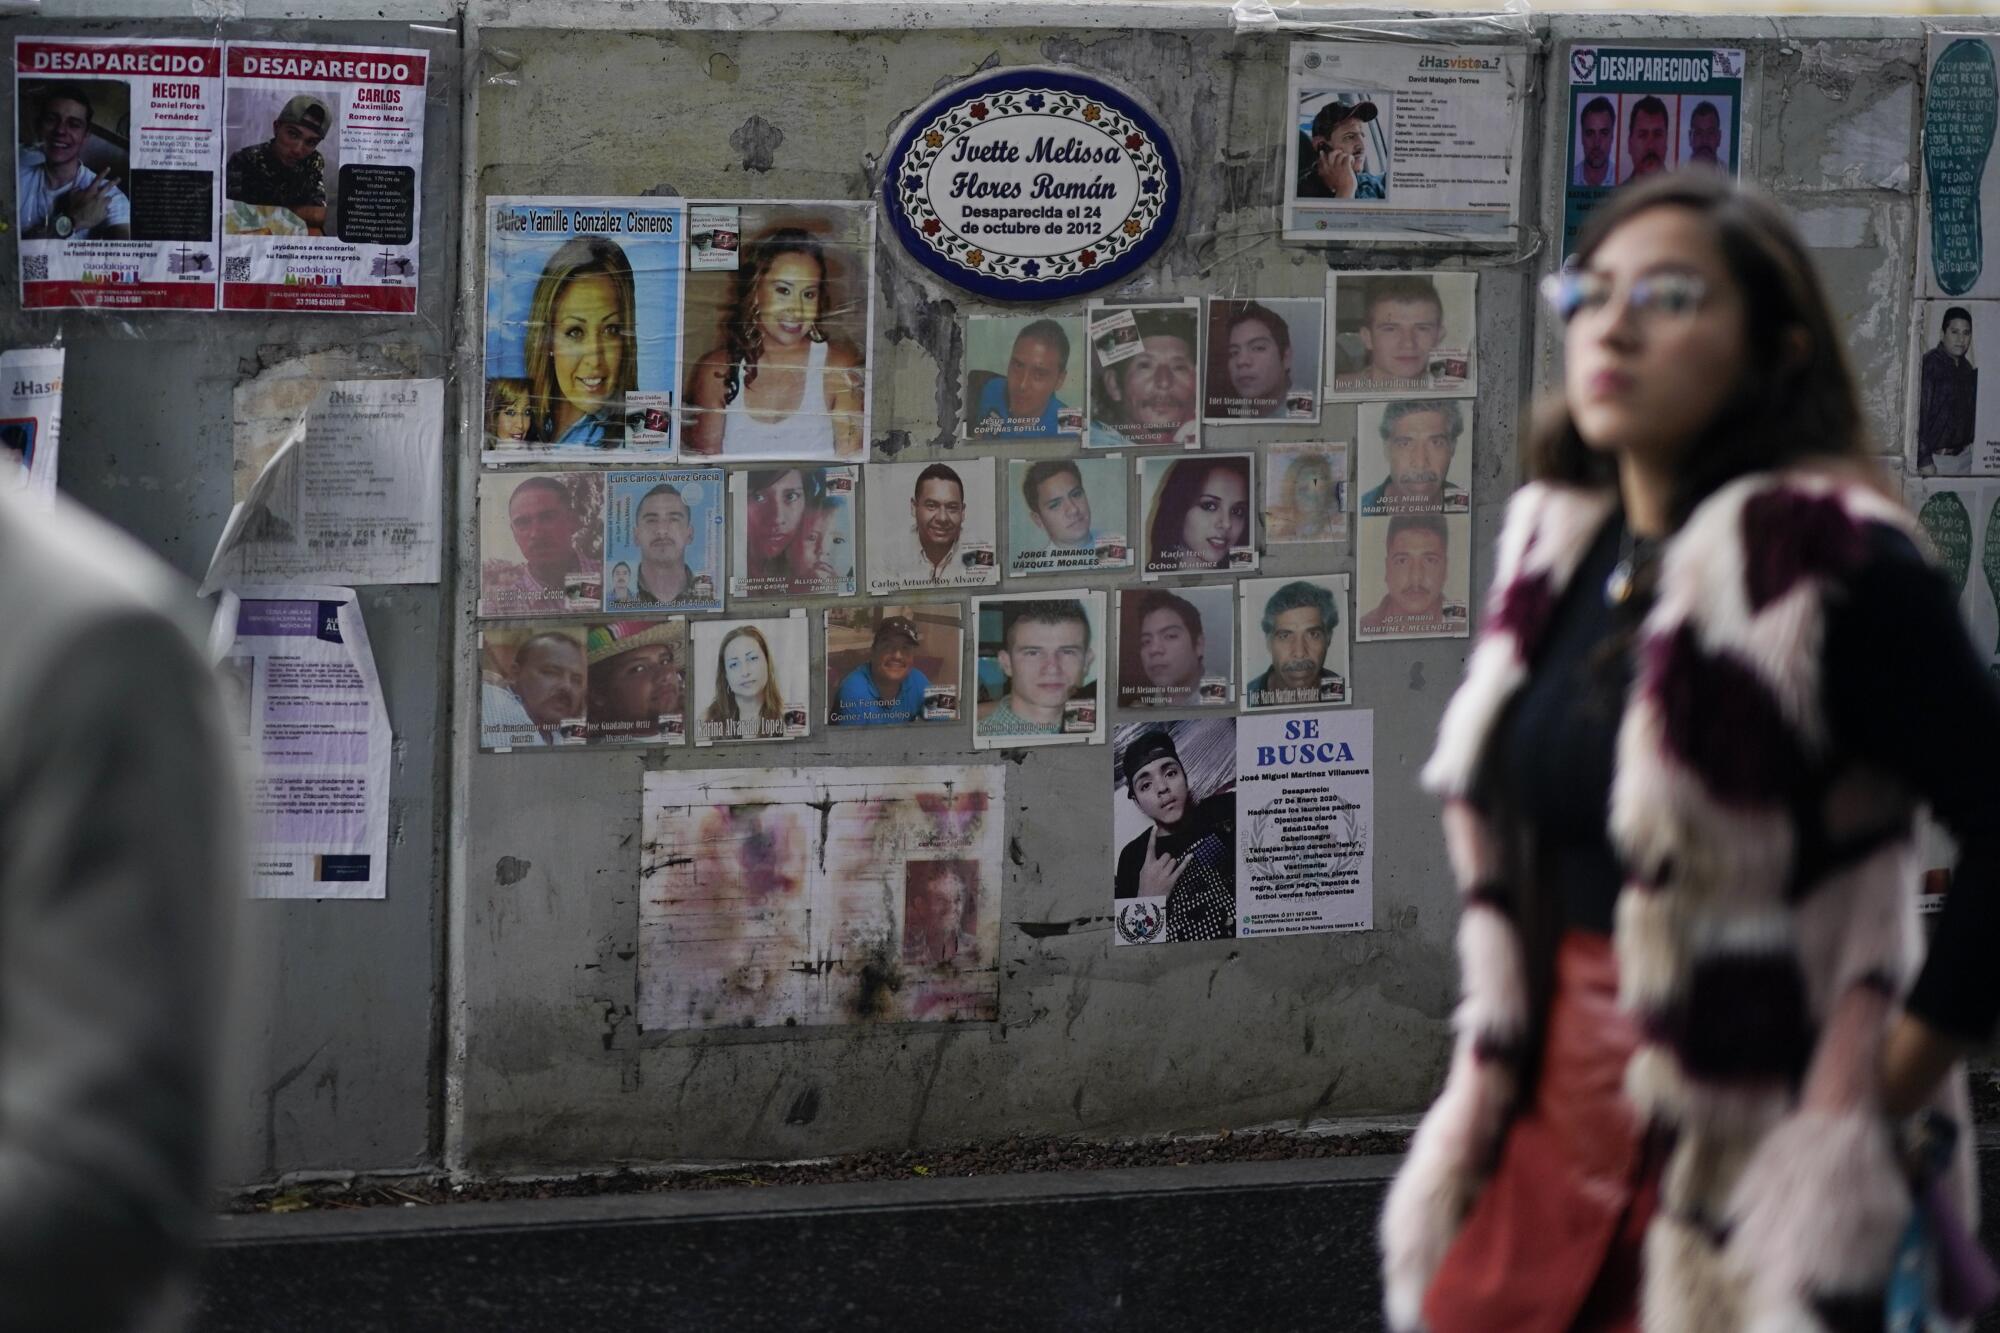 A woman with dark hair and glasses walks near a wall with photographs of individual people. 